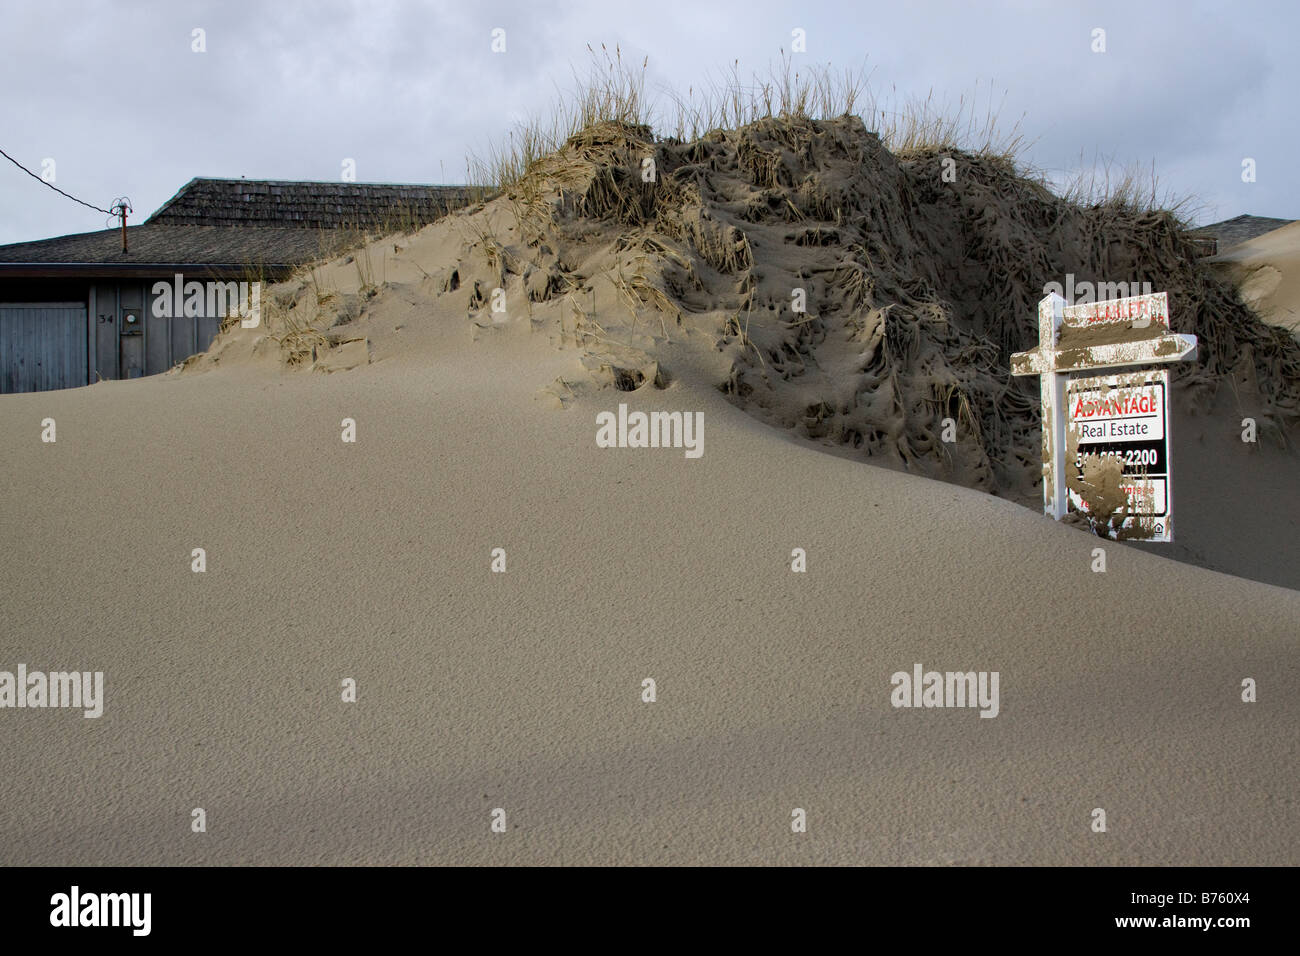 Sand dunes pile high against residences and a for sale sign after a winter storm on the Oregon coast. Stock Photo